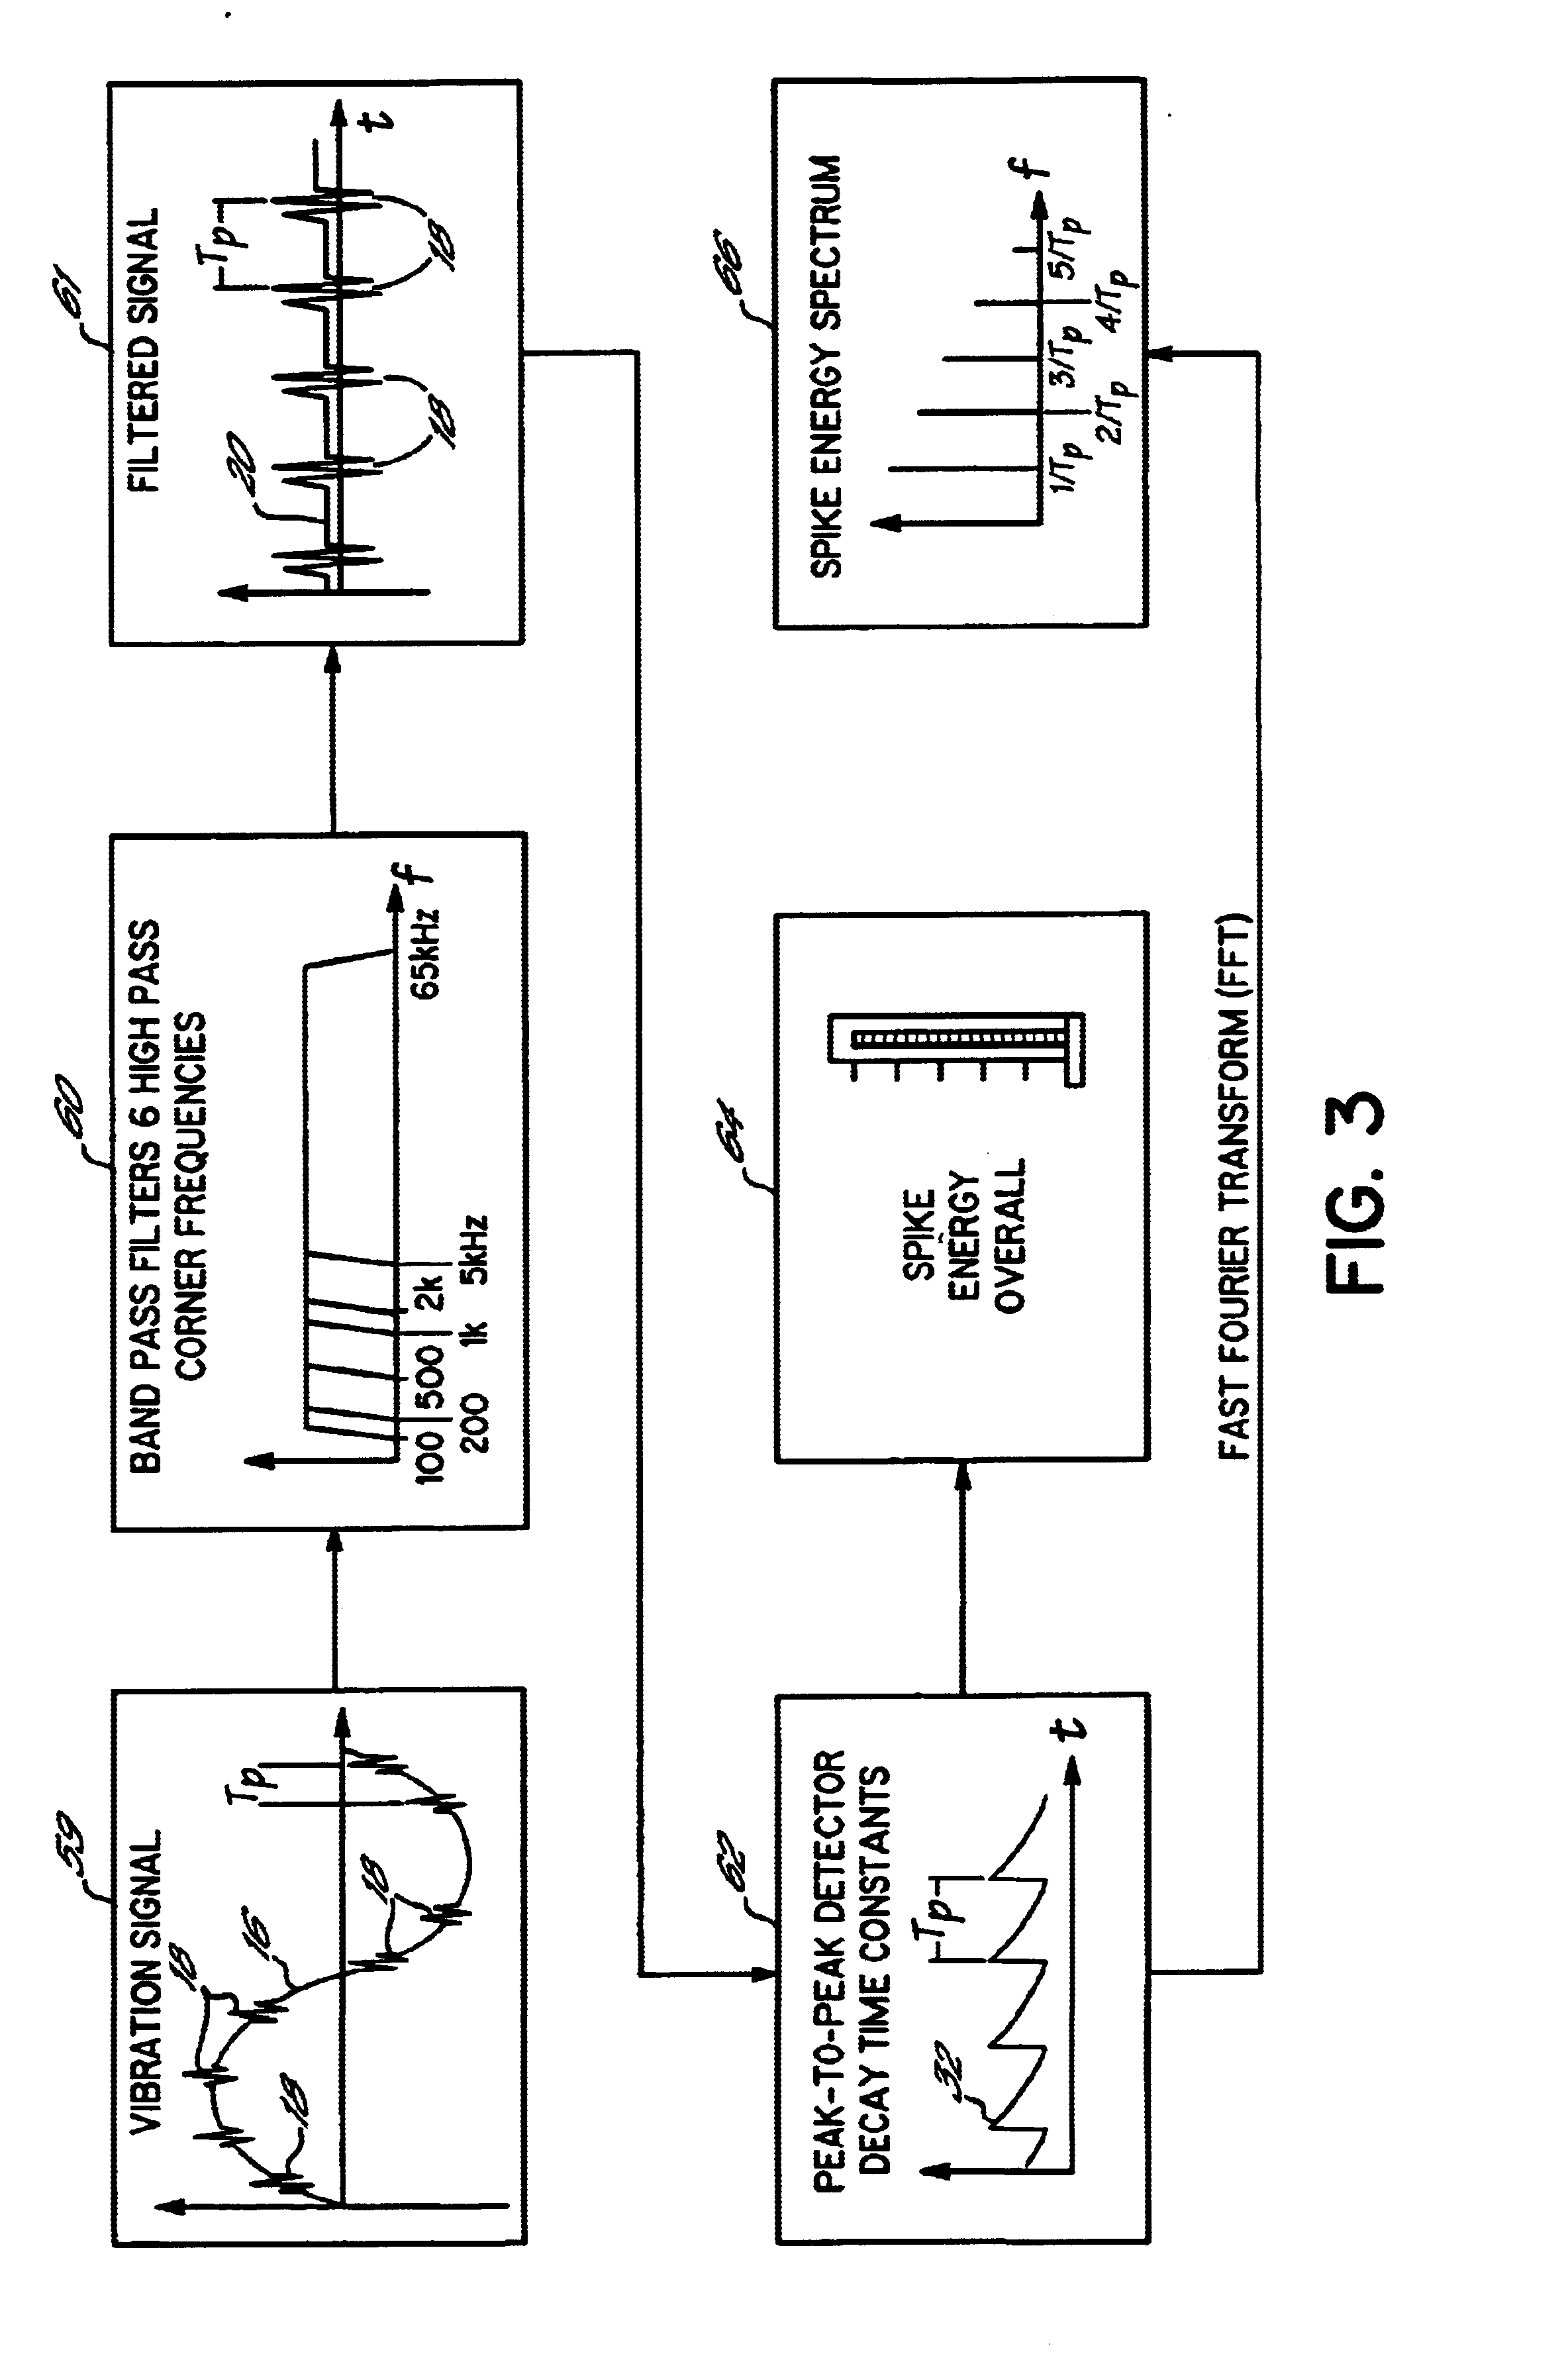 Adaptive high frequency energy detection